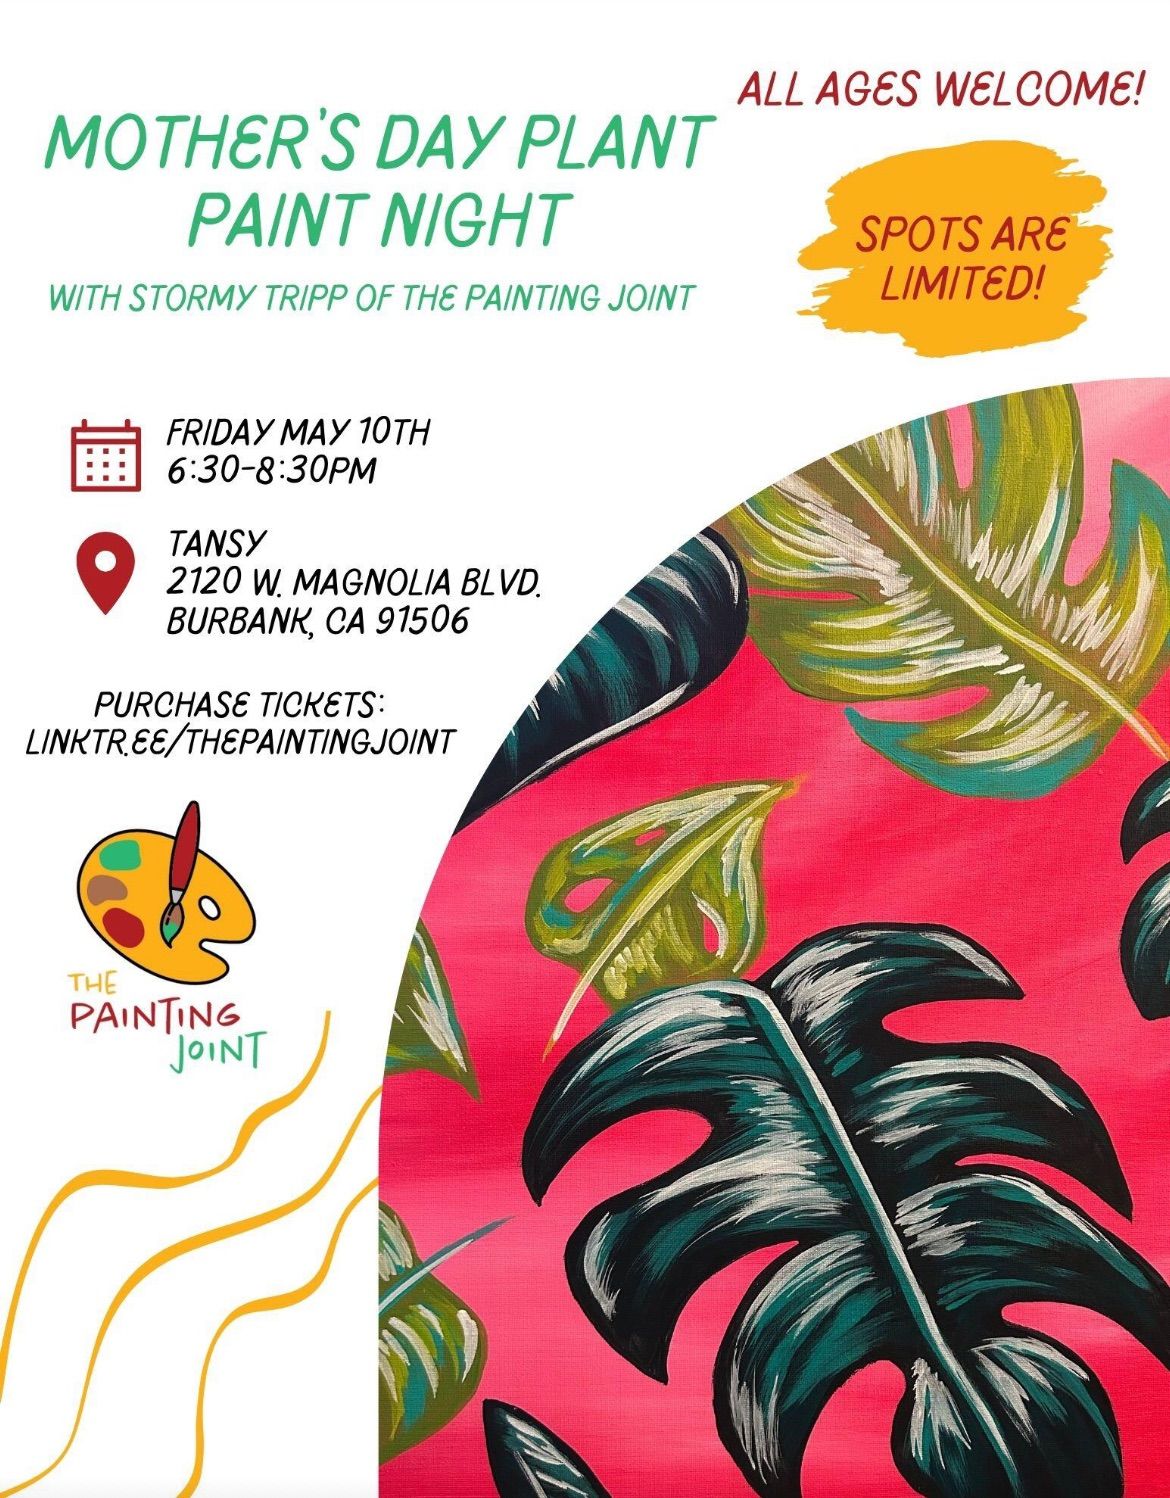 Mother's Day Plant Paint Night - All Ages Welcome!